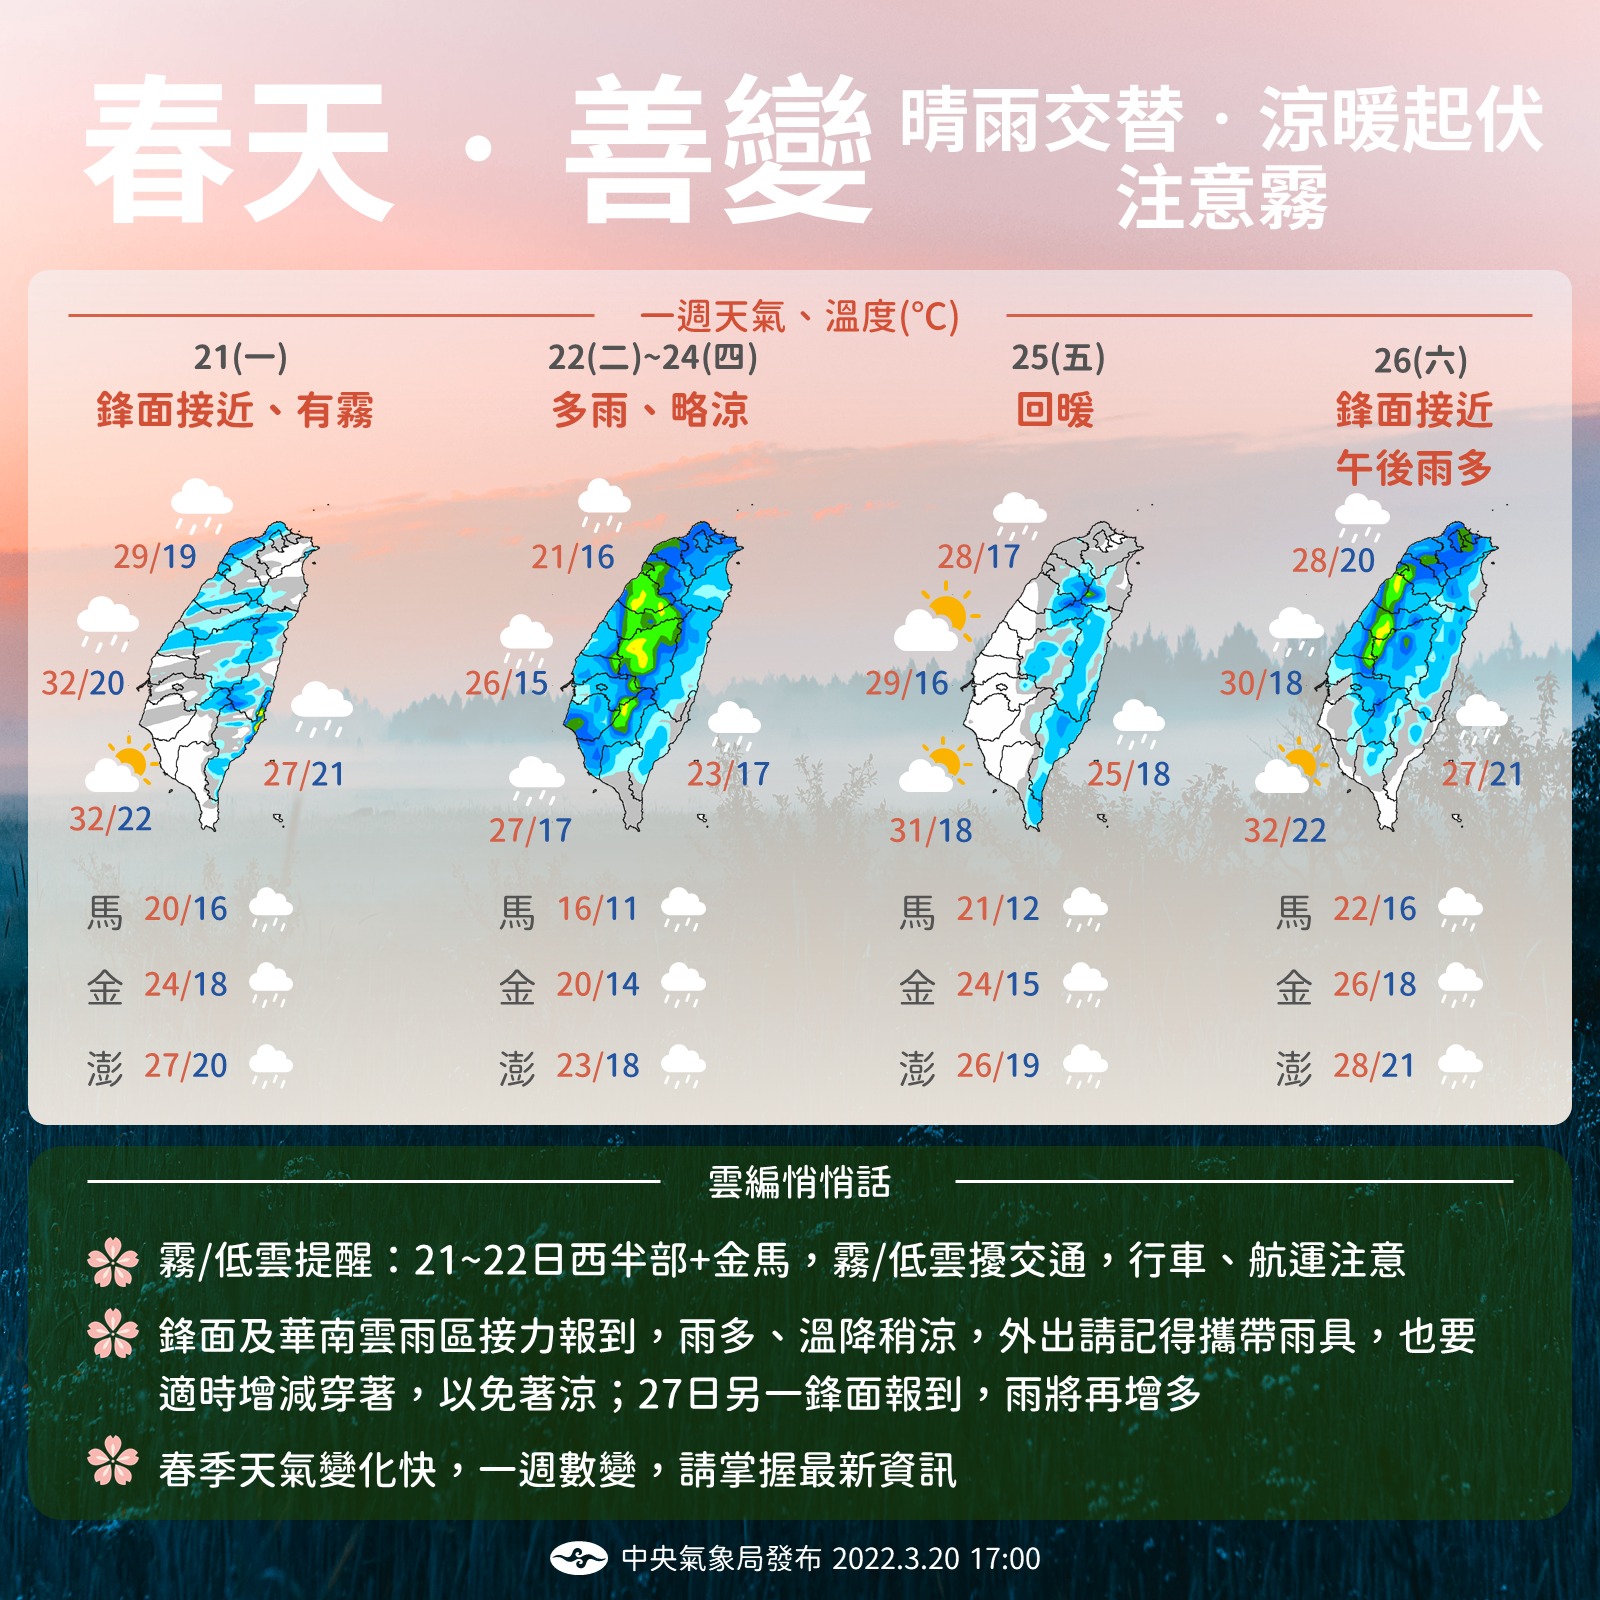 Weekly weather changes.  (Photo/Photo taken from the Meteorological Bureau Facebook) 10 degrees plummeted in one day!  "Super Thunderstorm Bullets" swept across Taiwan in the two-day highlight